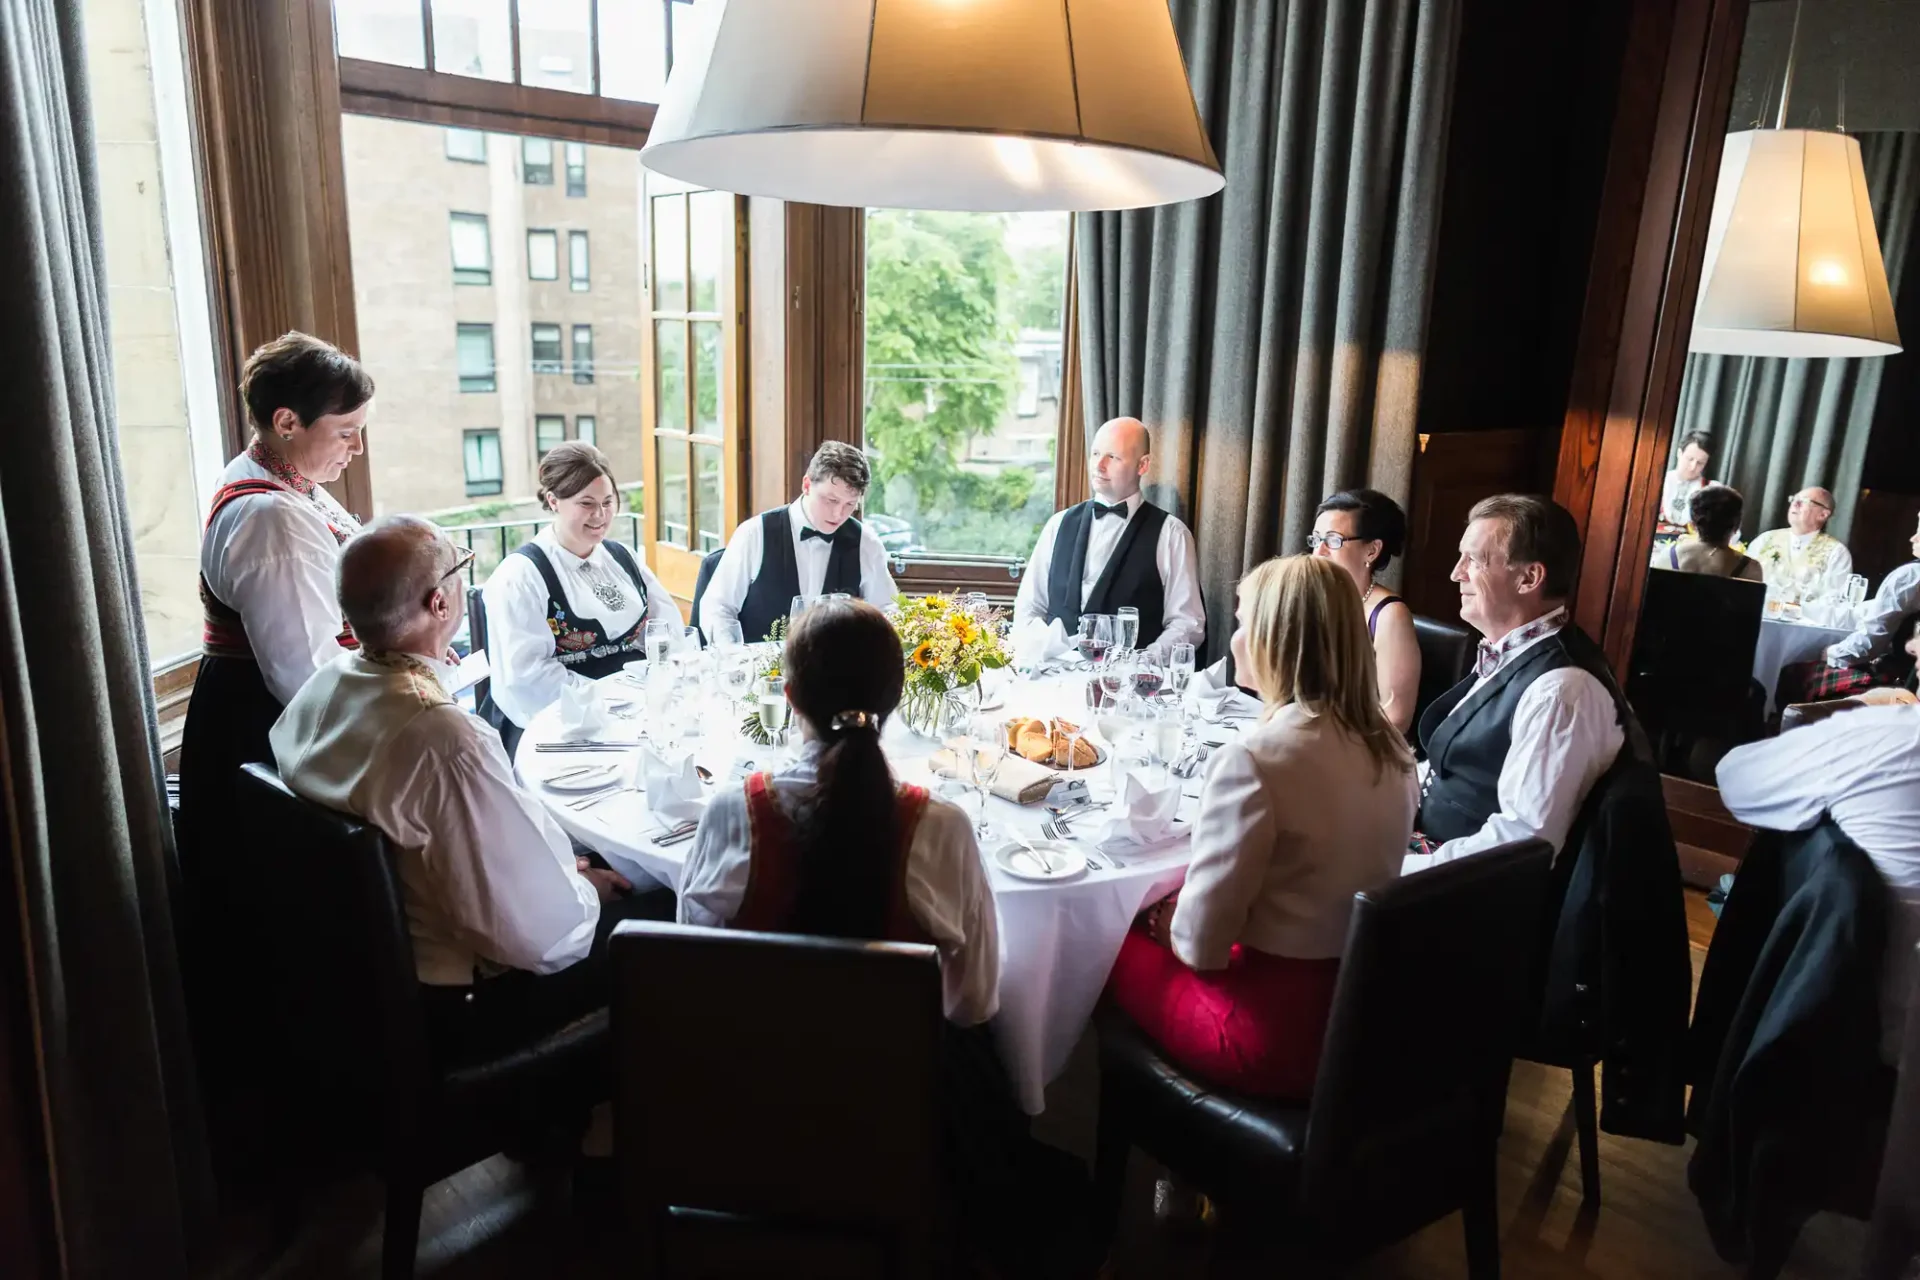 Elegant dining setting with a group of formally dressed adults seated around a table, being attended to by waitstaff in a luxurious restaurant.